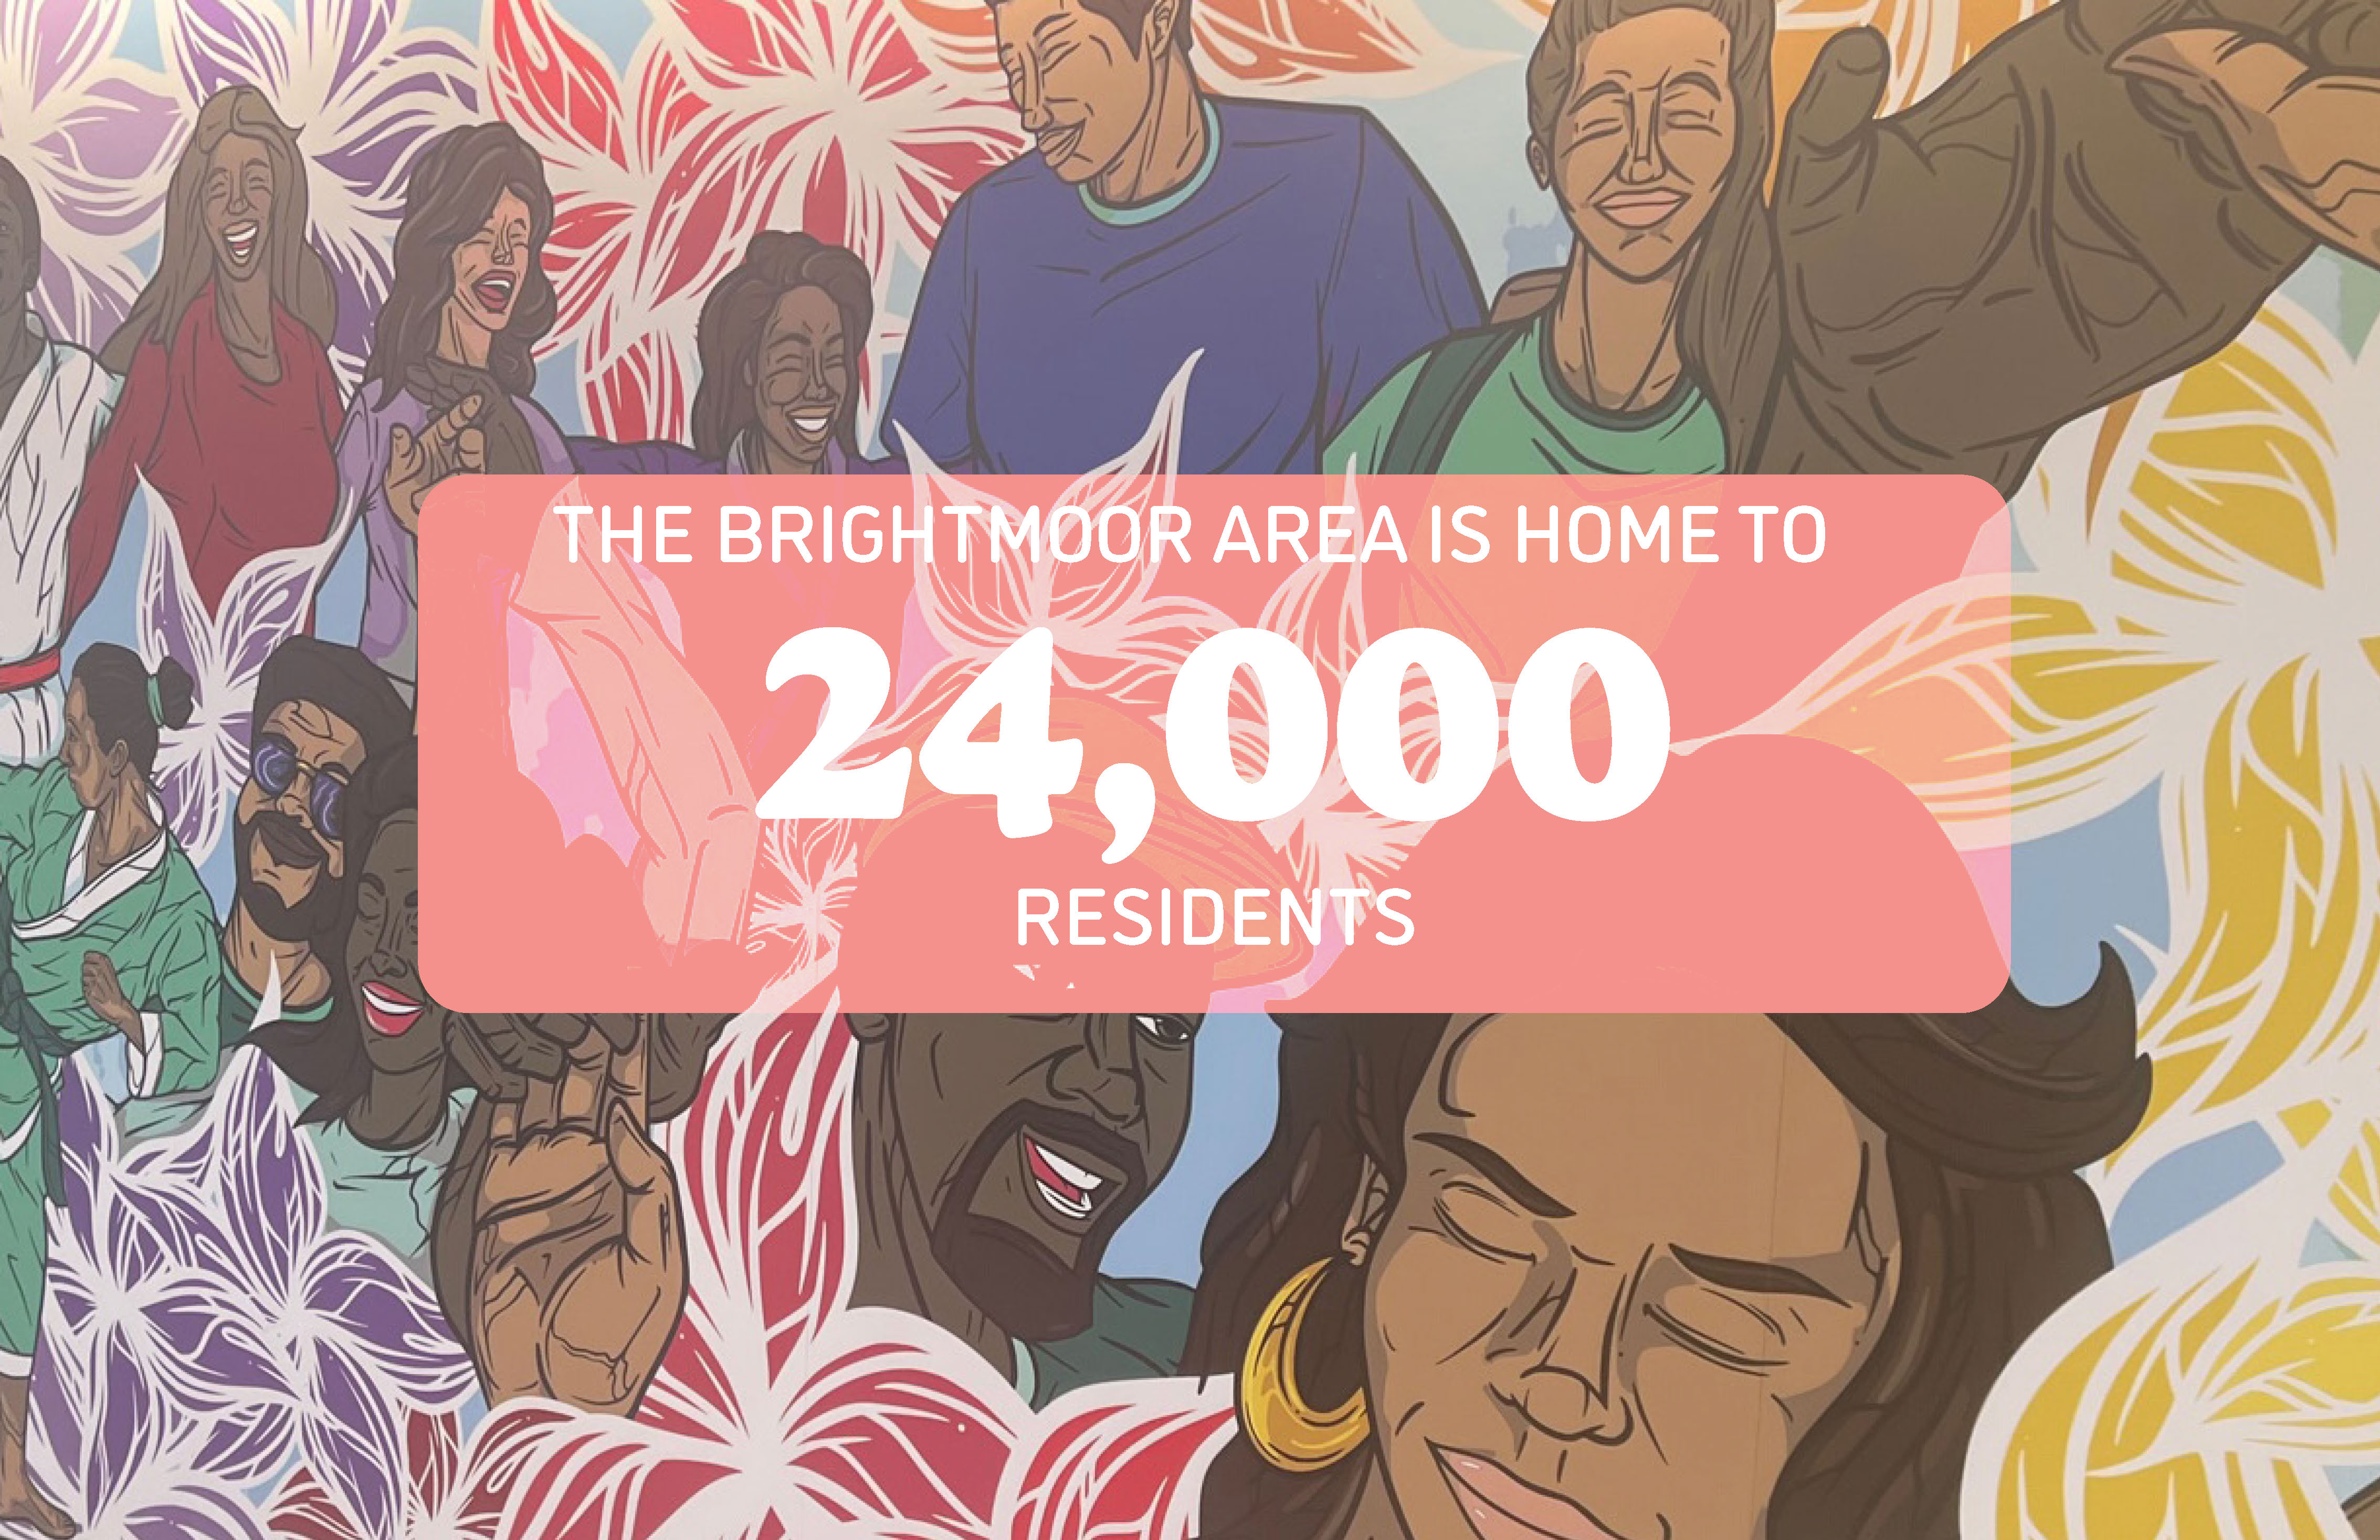 The Brightmoor Area is home to 24,000 residents